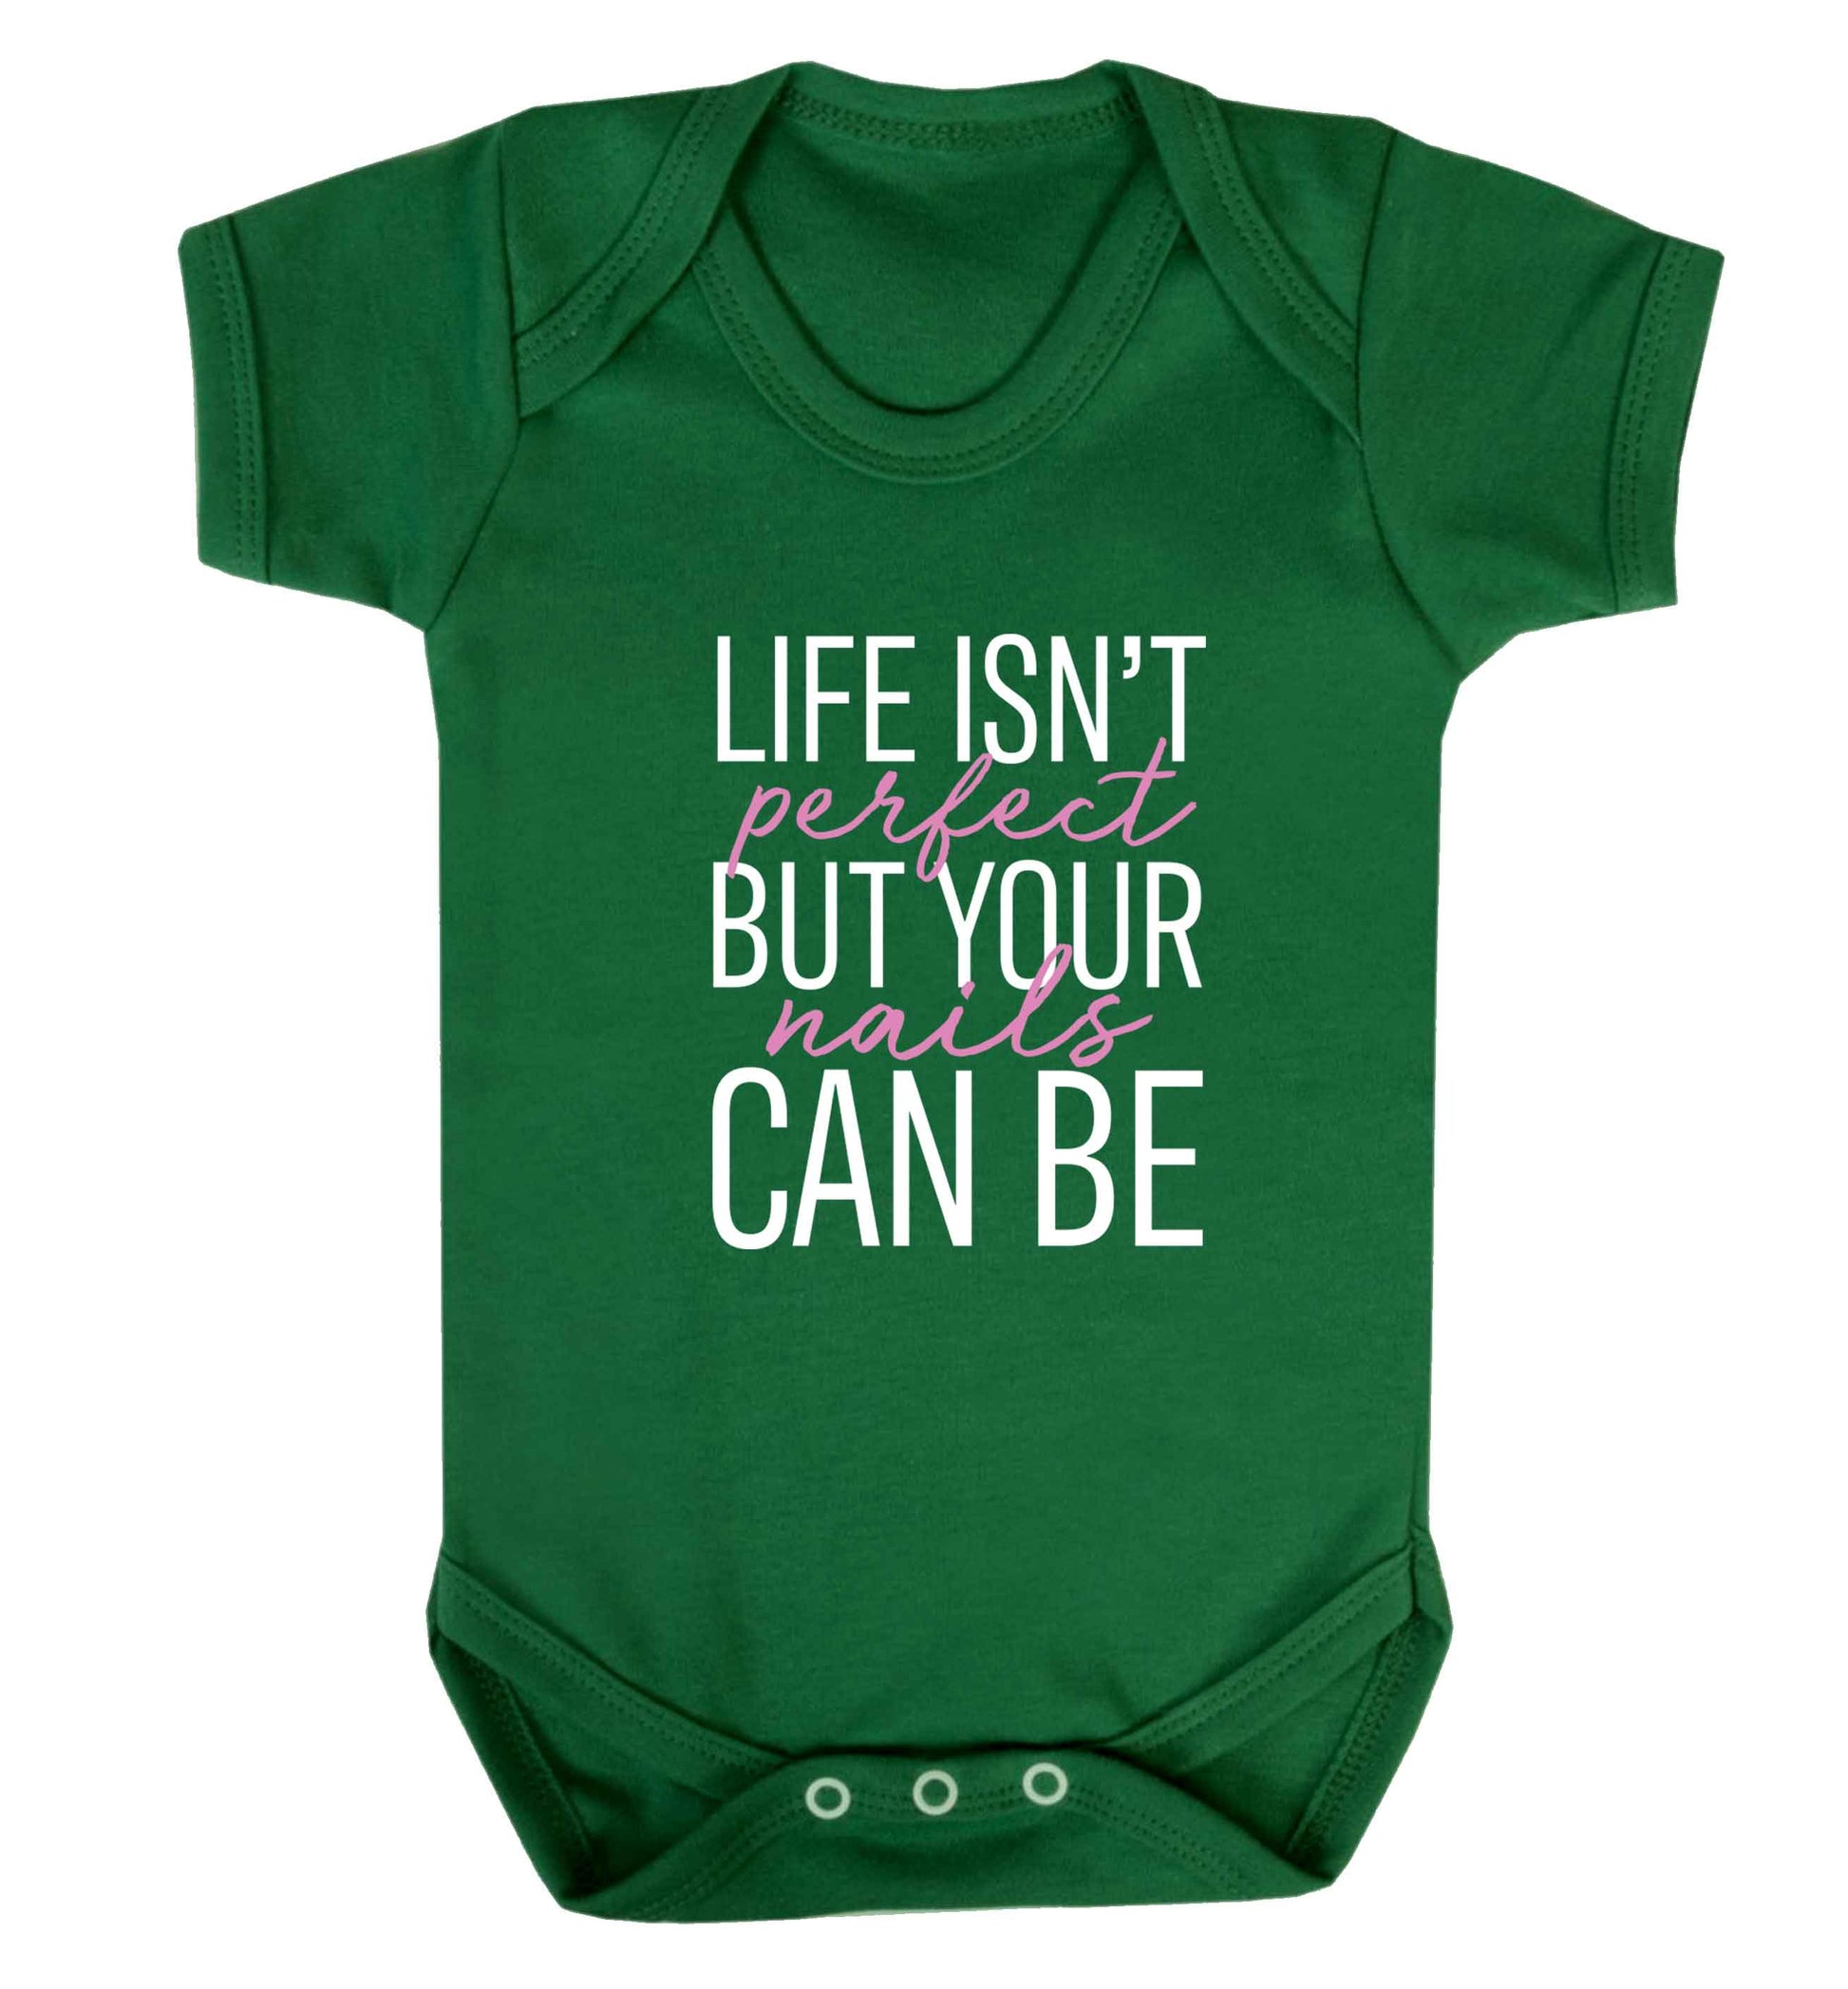 Life isn't perfect but your nails can be baby vest green 18-24 months